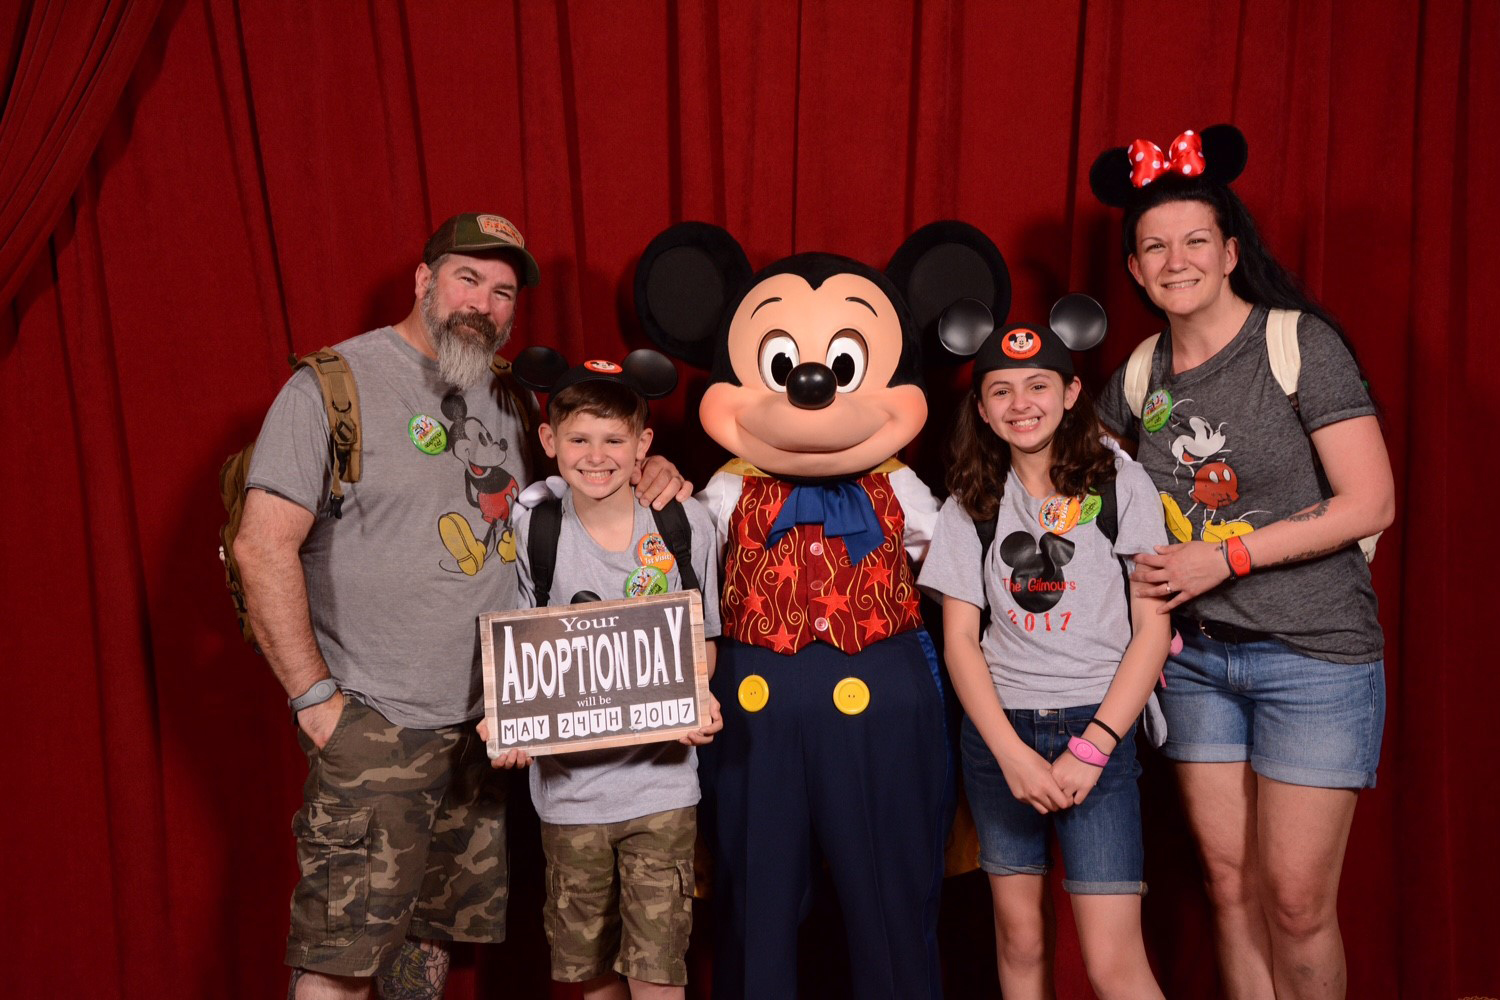 PHOTO: Janielle and Elijah Gilmour of Portland, Pennsylvania, were surprised to learn their adoption date at Disney's Magic Kingdom.